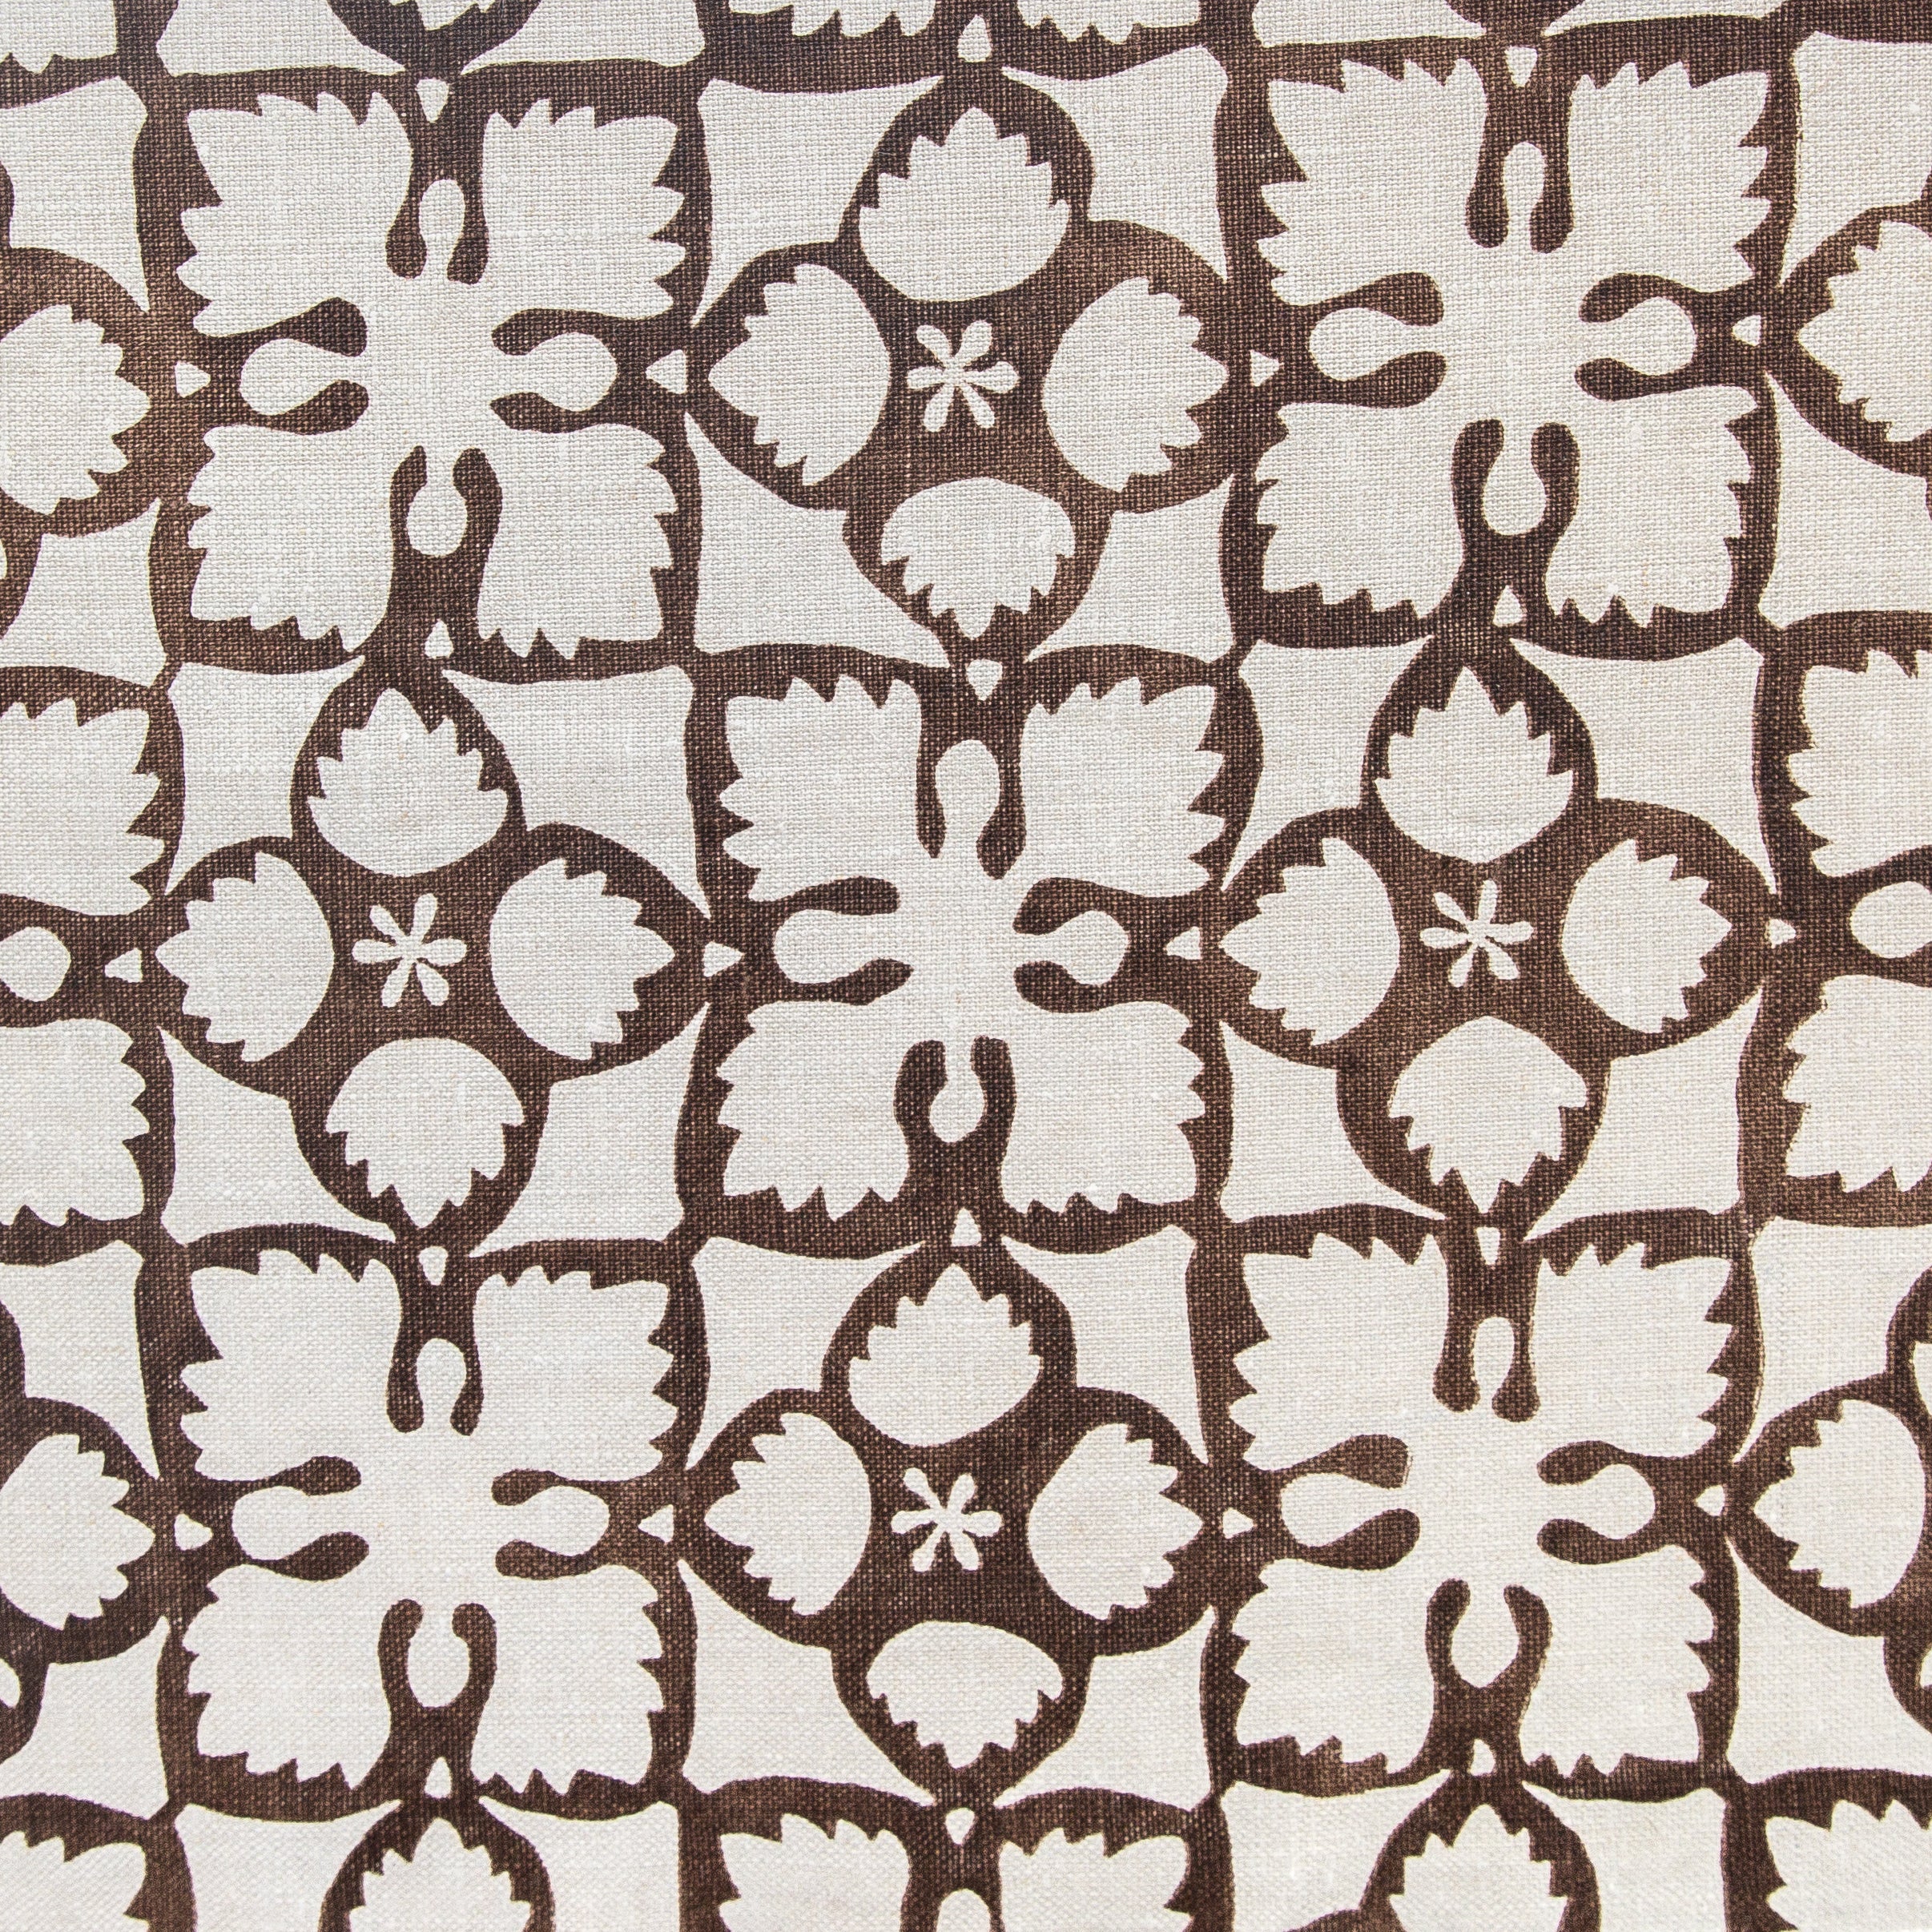 Detail of fabric in a botanical lattice print in brown on a cream field.